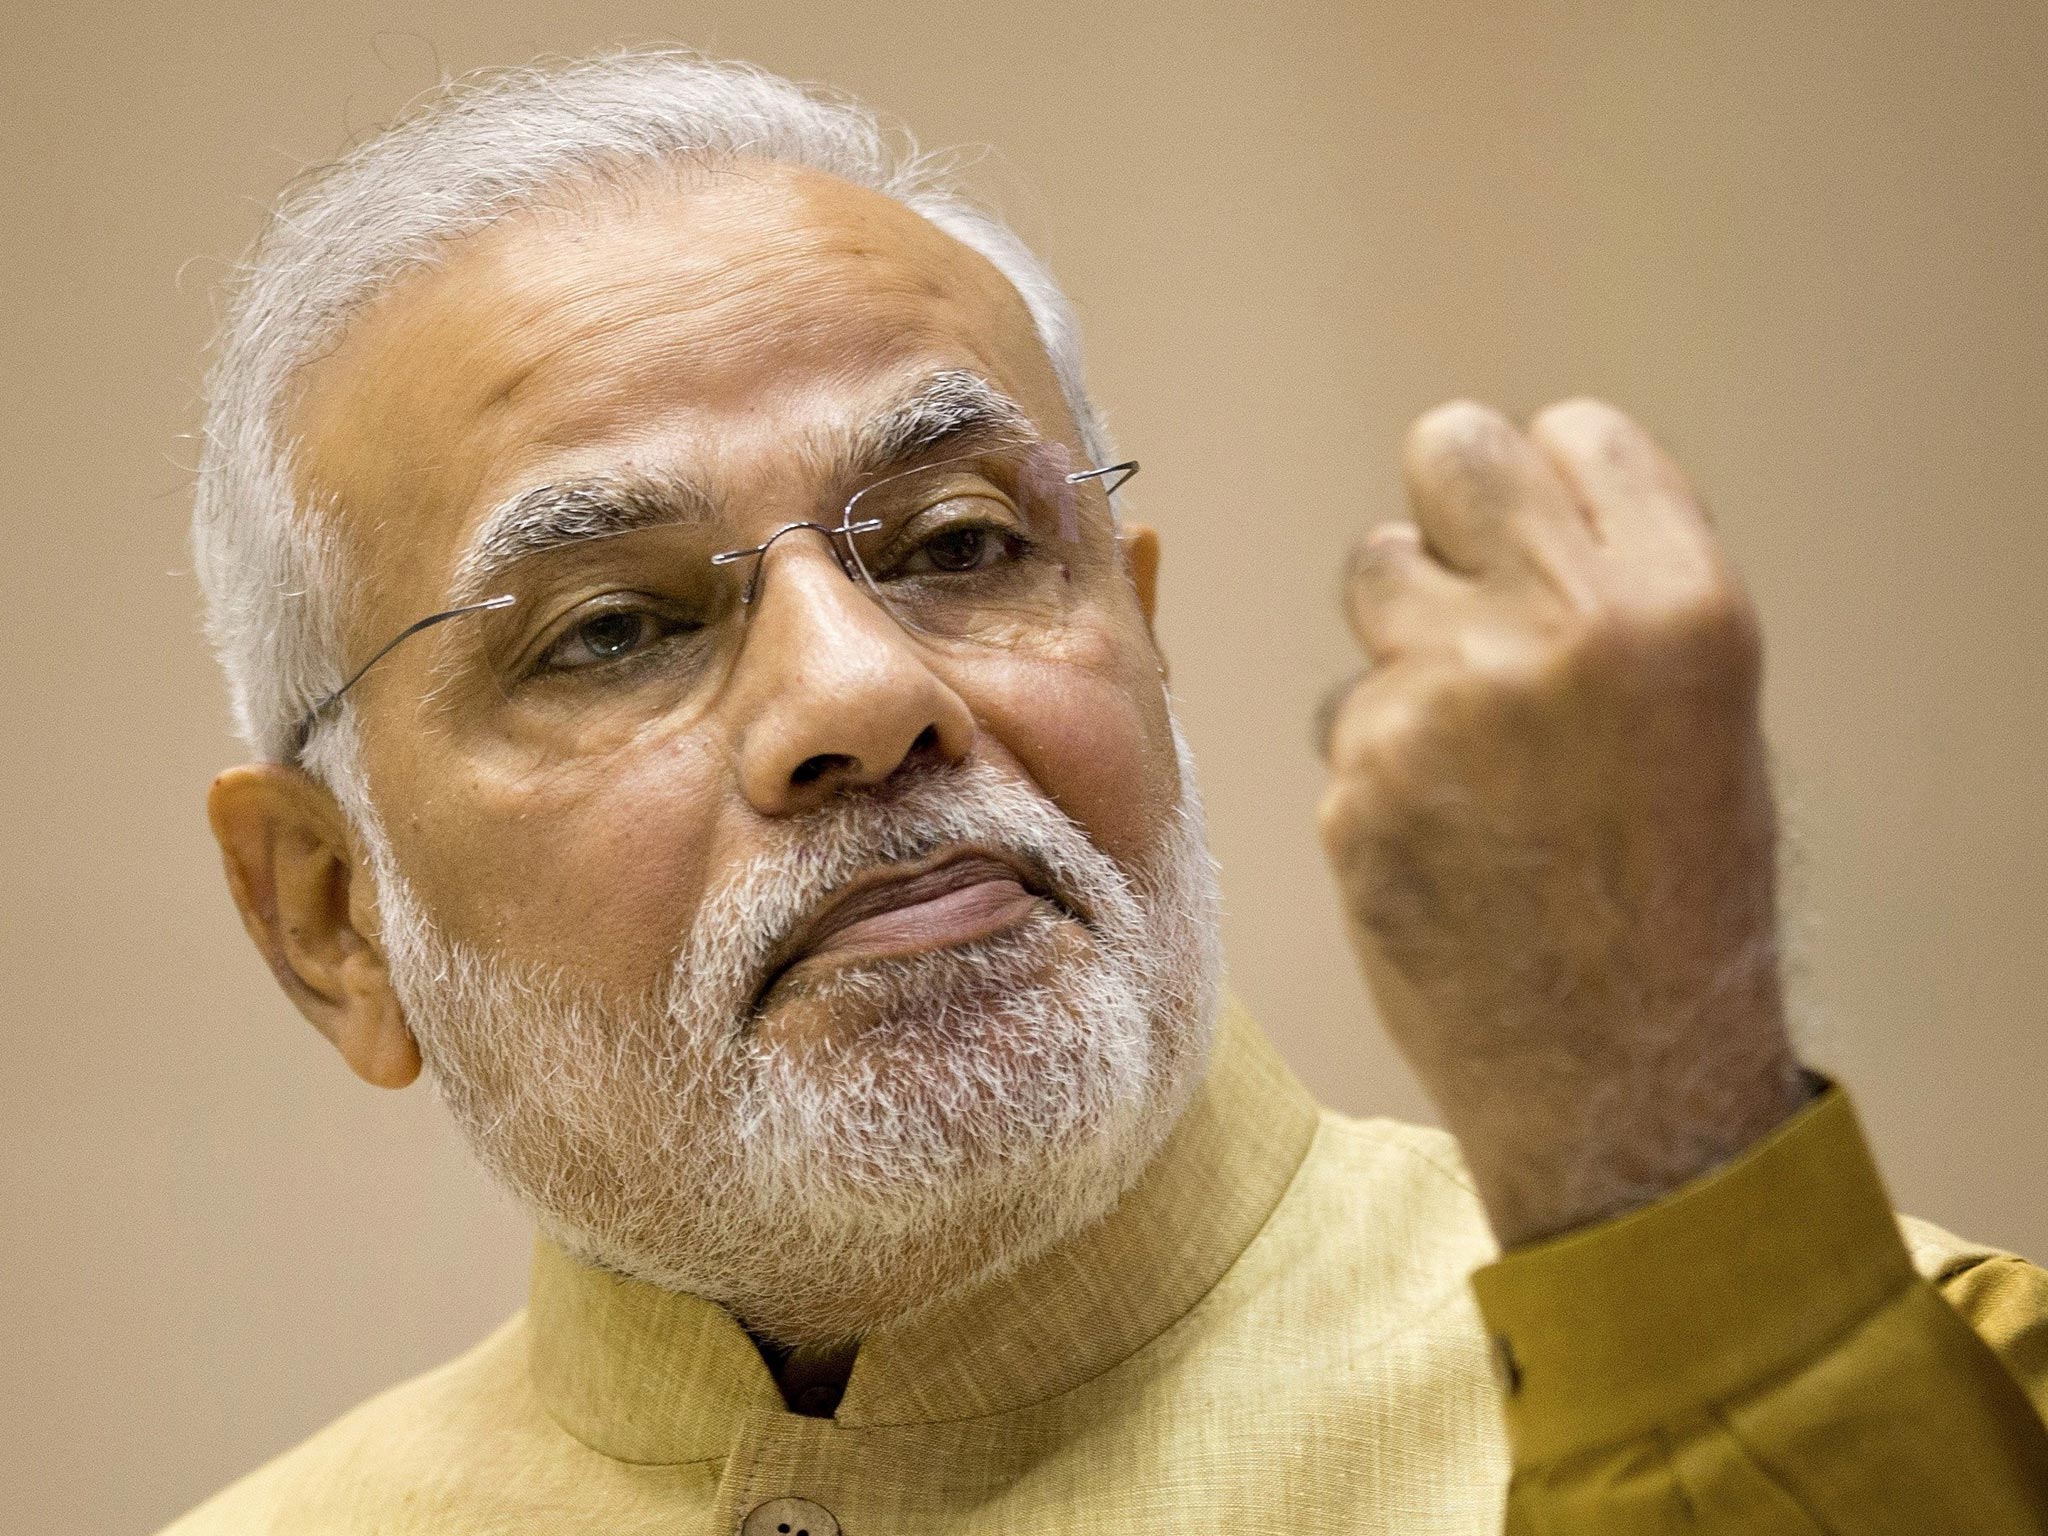 India's Prime Minister Narendra Modi has vowed to crack down on untaxed transactions